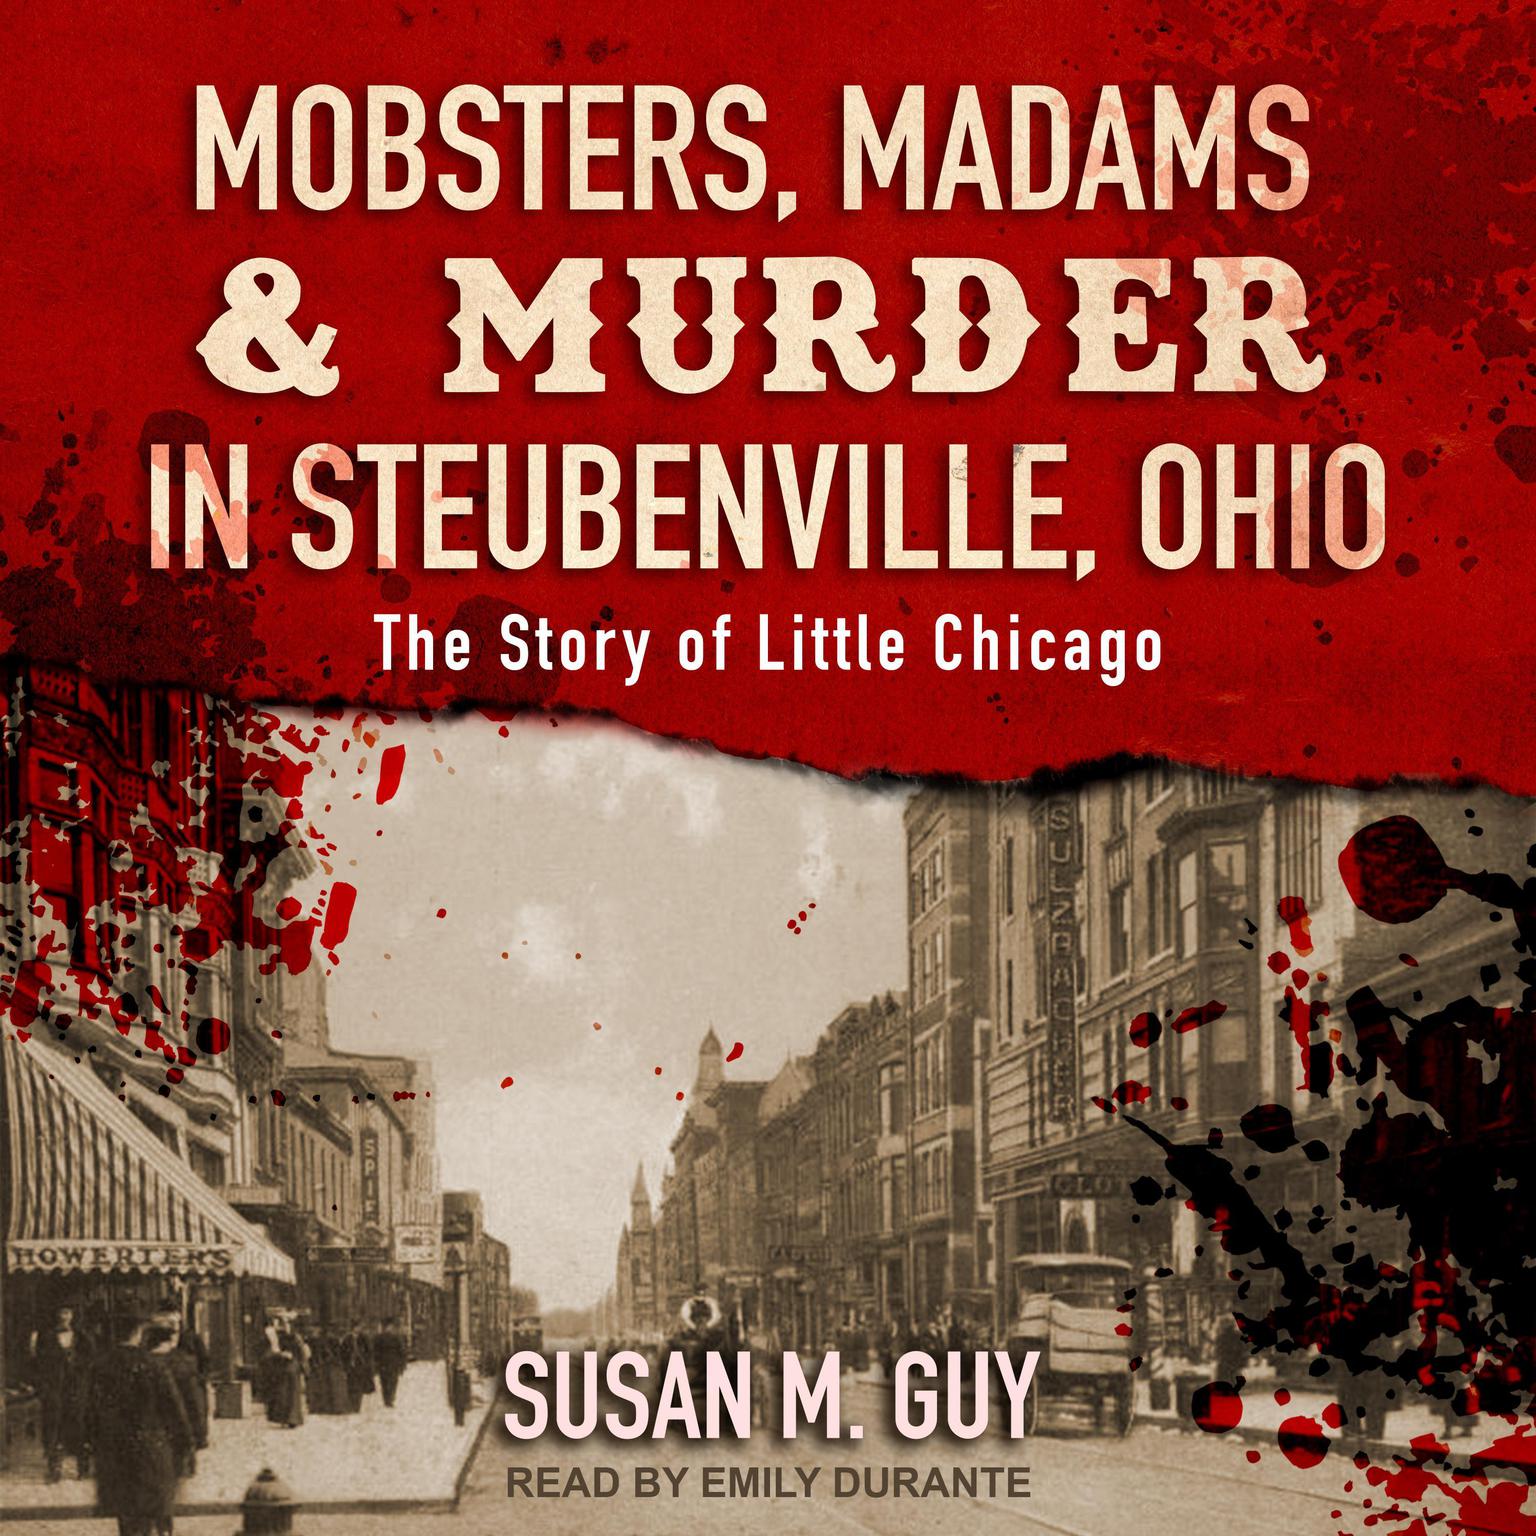 Mobsters, Madams & Murder in Steubenville, Ohio: The Story of Little Chicago Audiobook, by Susan M. Guy